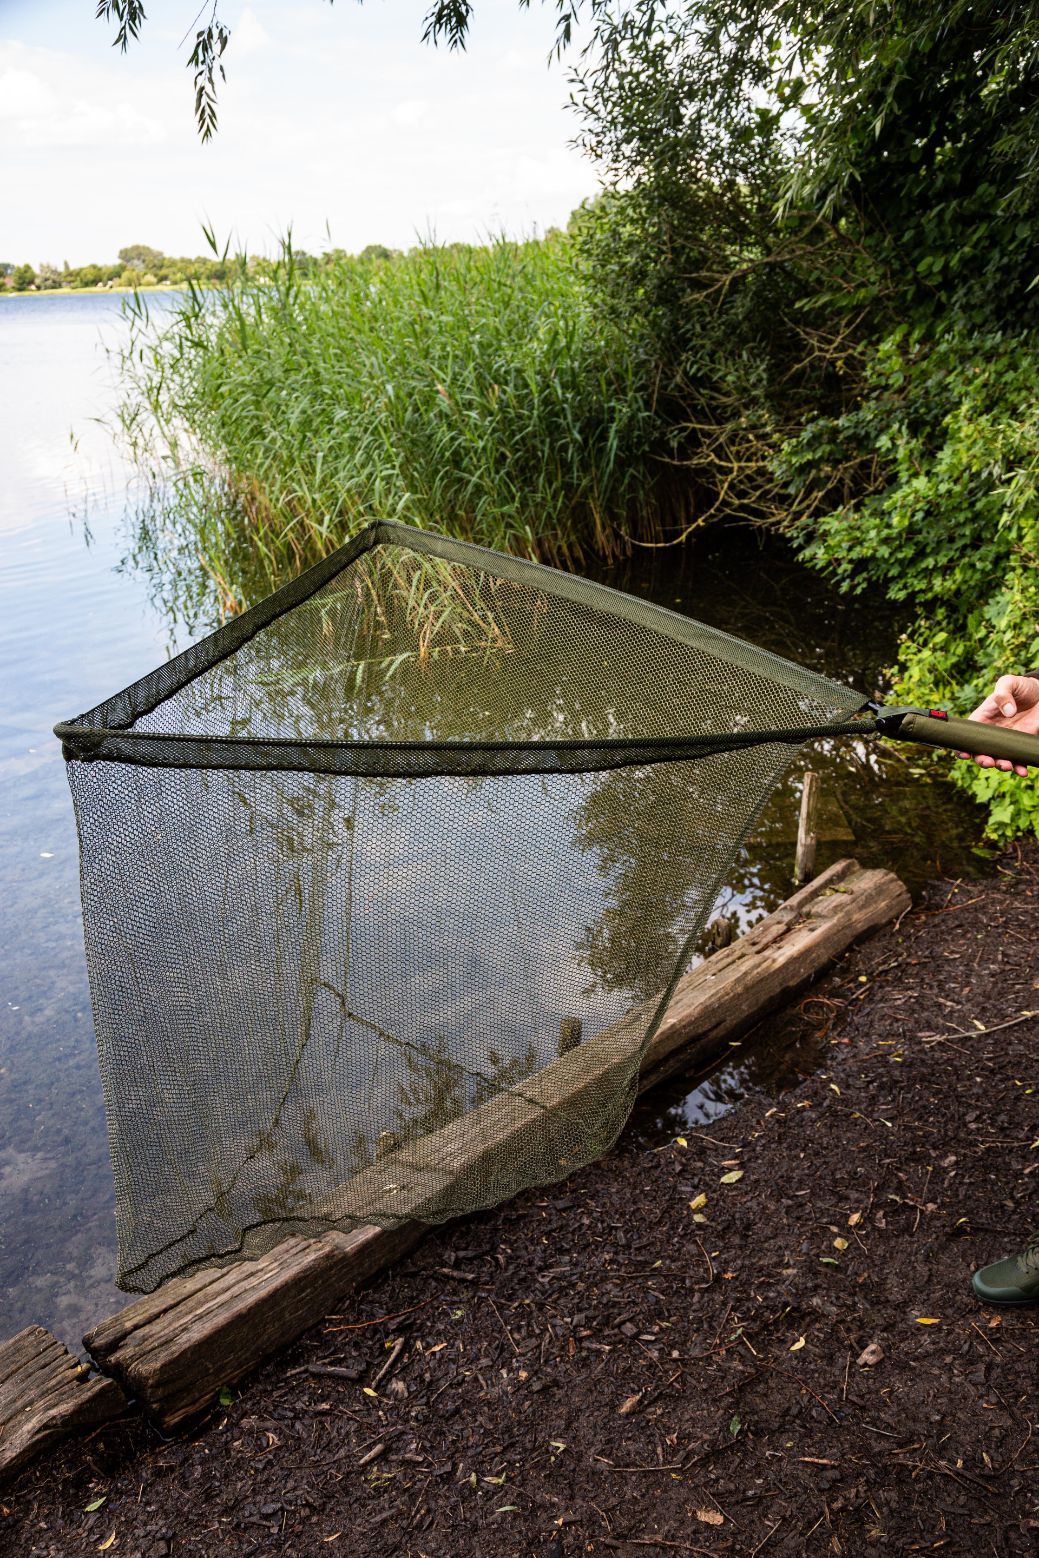 Ultimate DeLuxe Carp Net 42" with 2pcs Carbon Handle